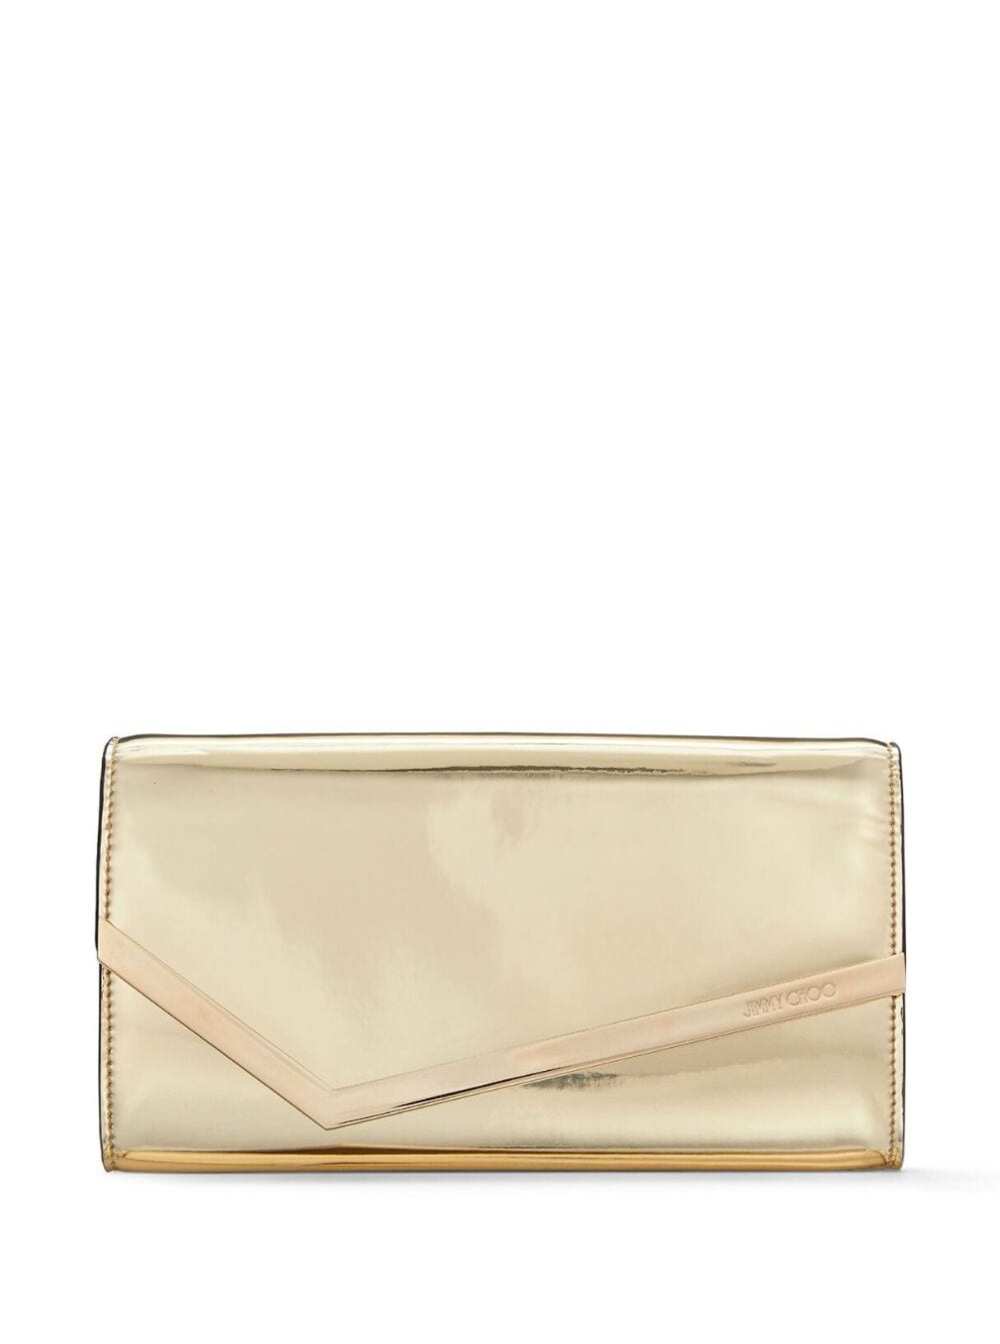 JIMMY CHOO EMMIE GOLD-colourED HANDBAG WITH MAGNETIC FASTENING IN MIRROR FABRIC WOMAN